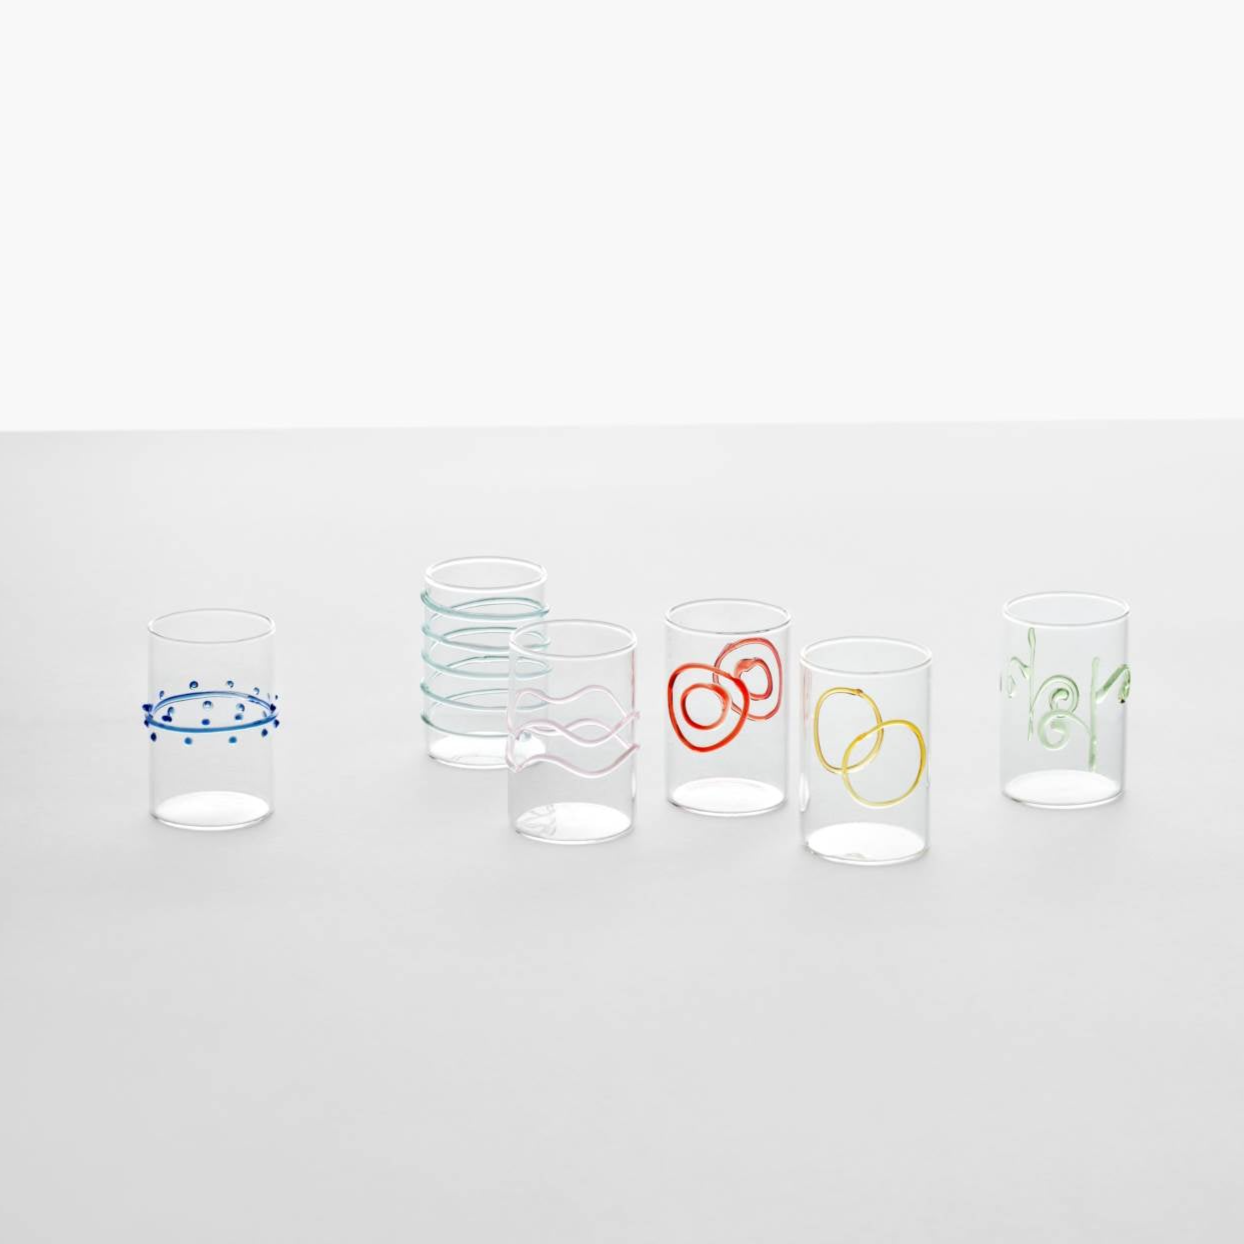 colourful set of 6 water glasses in the style of Decó arlecchino by design studio Forti E Di Loreto, photographed on a grey and white background